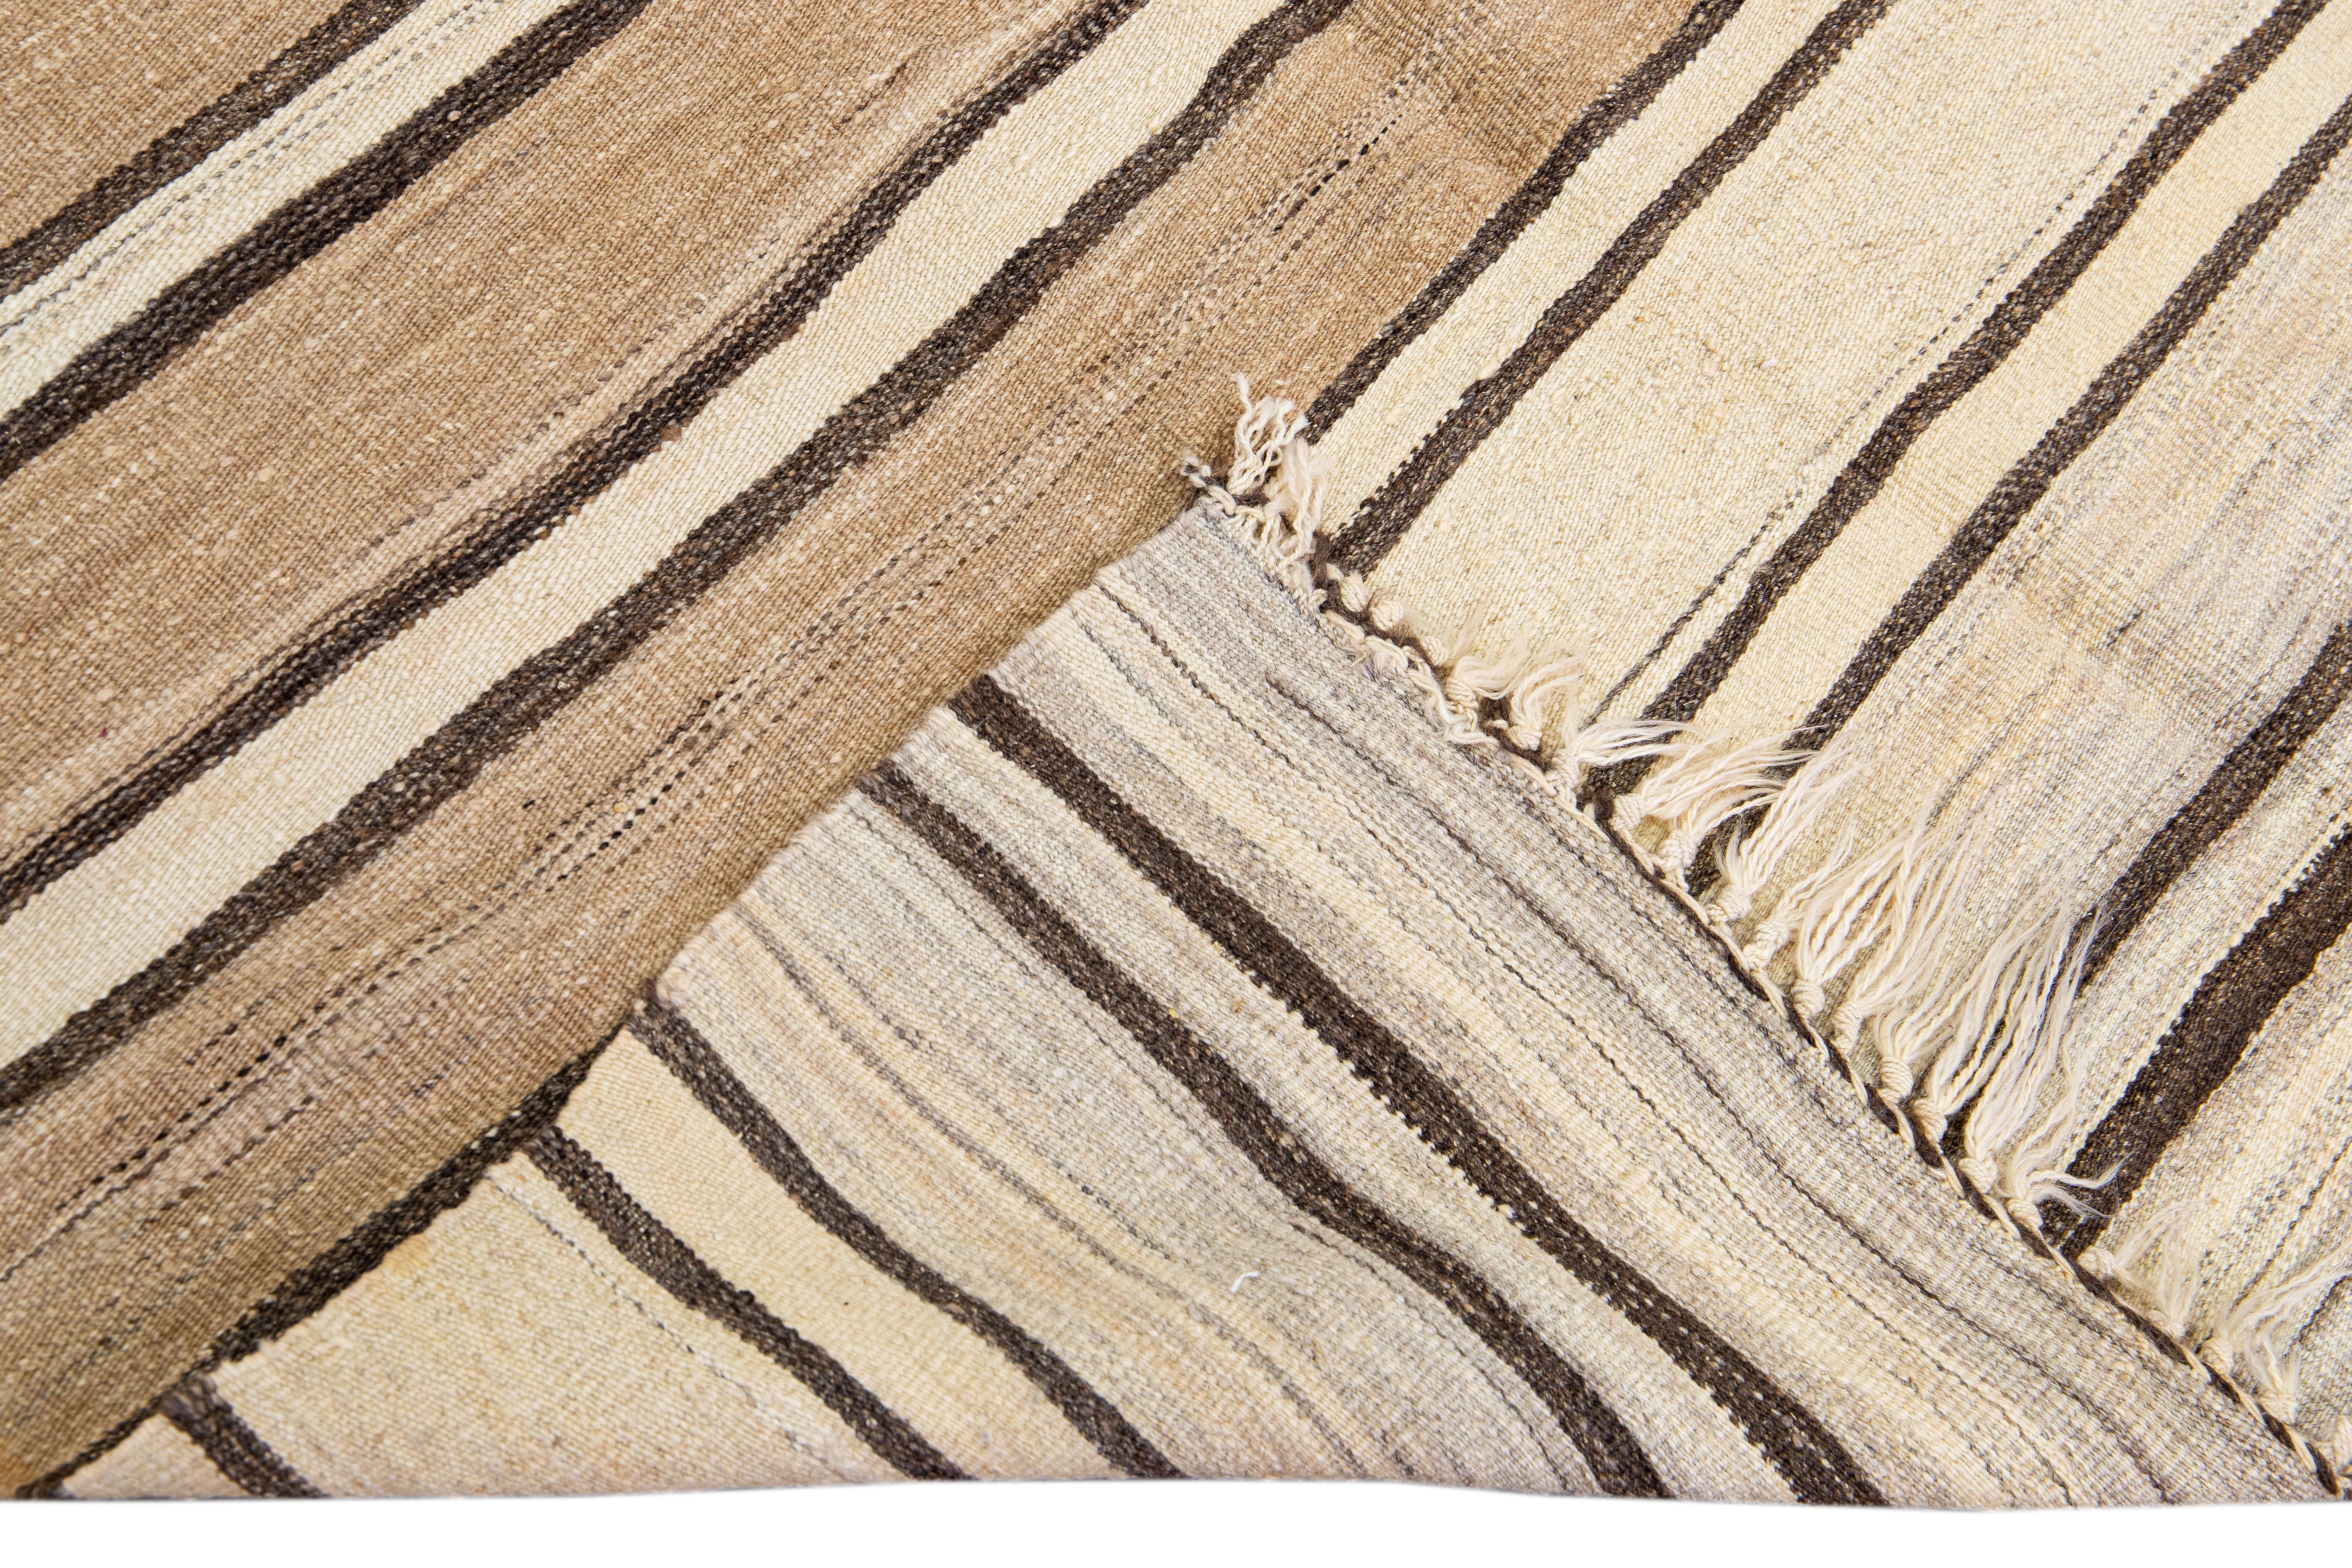 Beautiful kilim handmade wool rug with a beige field. This Vintage flatweave rug has brown Striped accents features a gorgeous all-over design with beige fringes.

This rug measures: 4'9